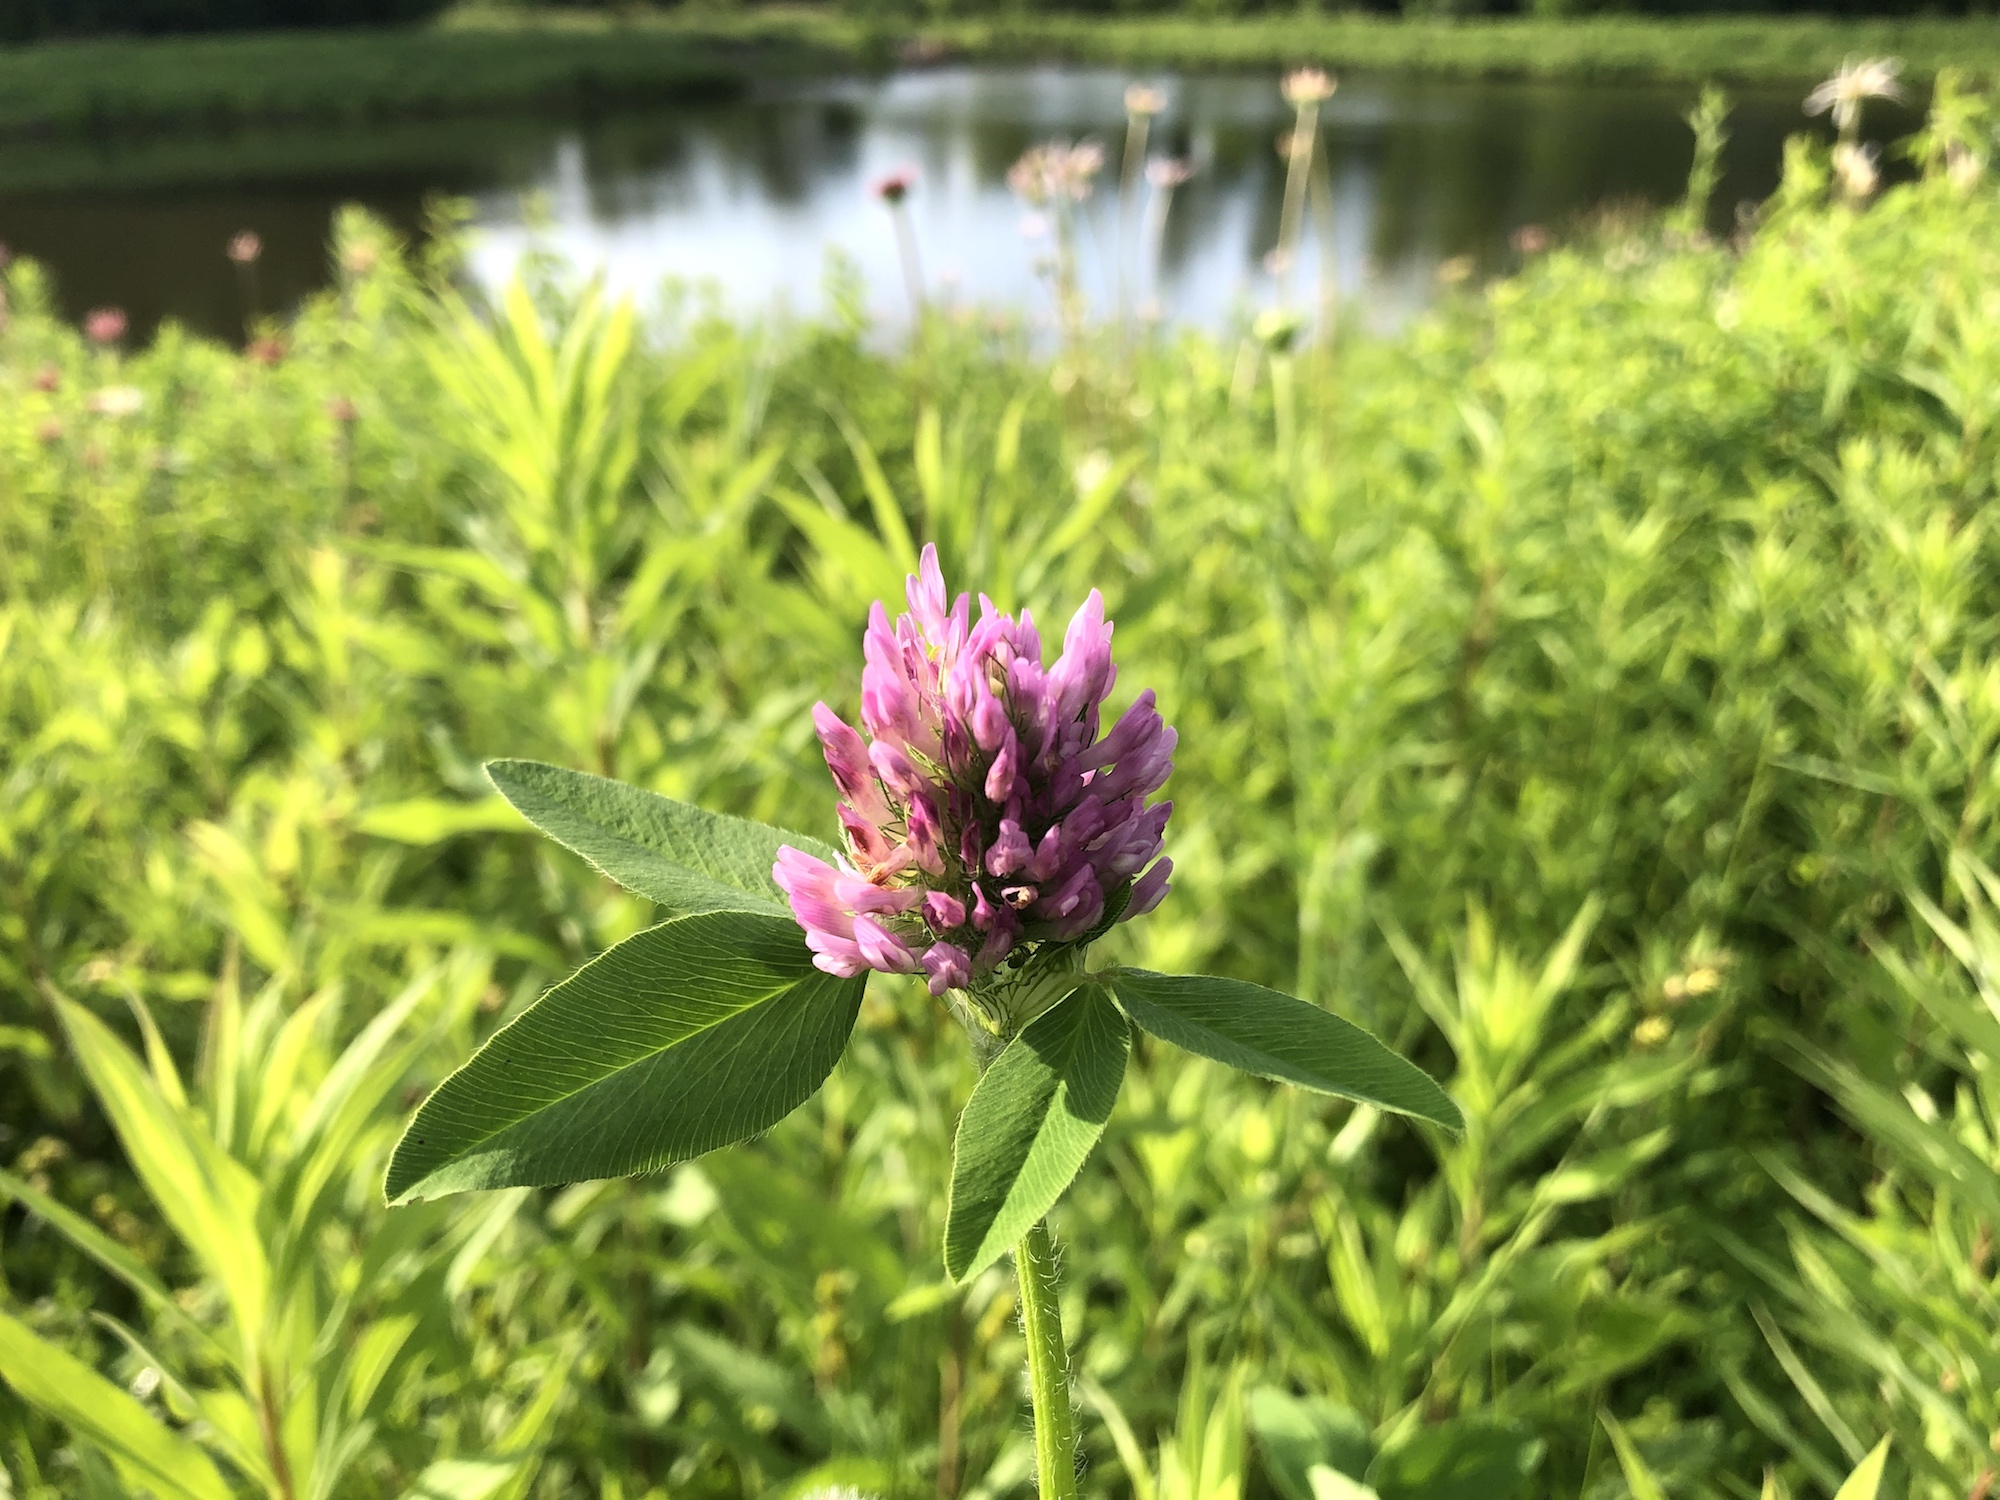 Red Clover on bank of retaining pond on June 20, 2019.